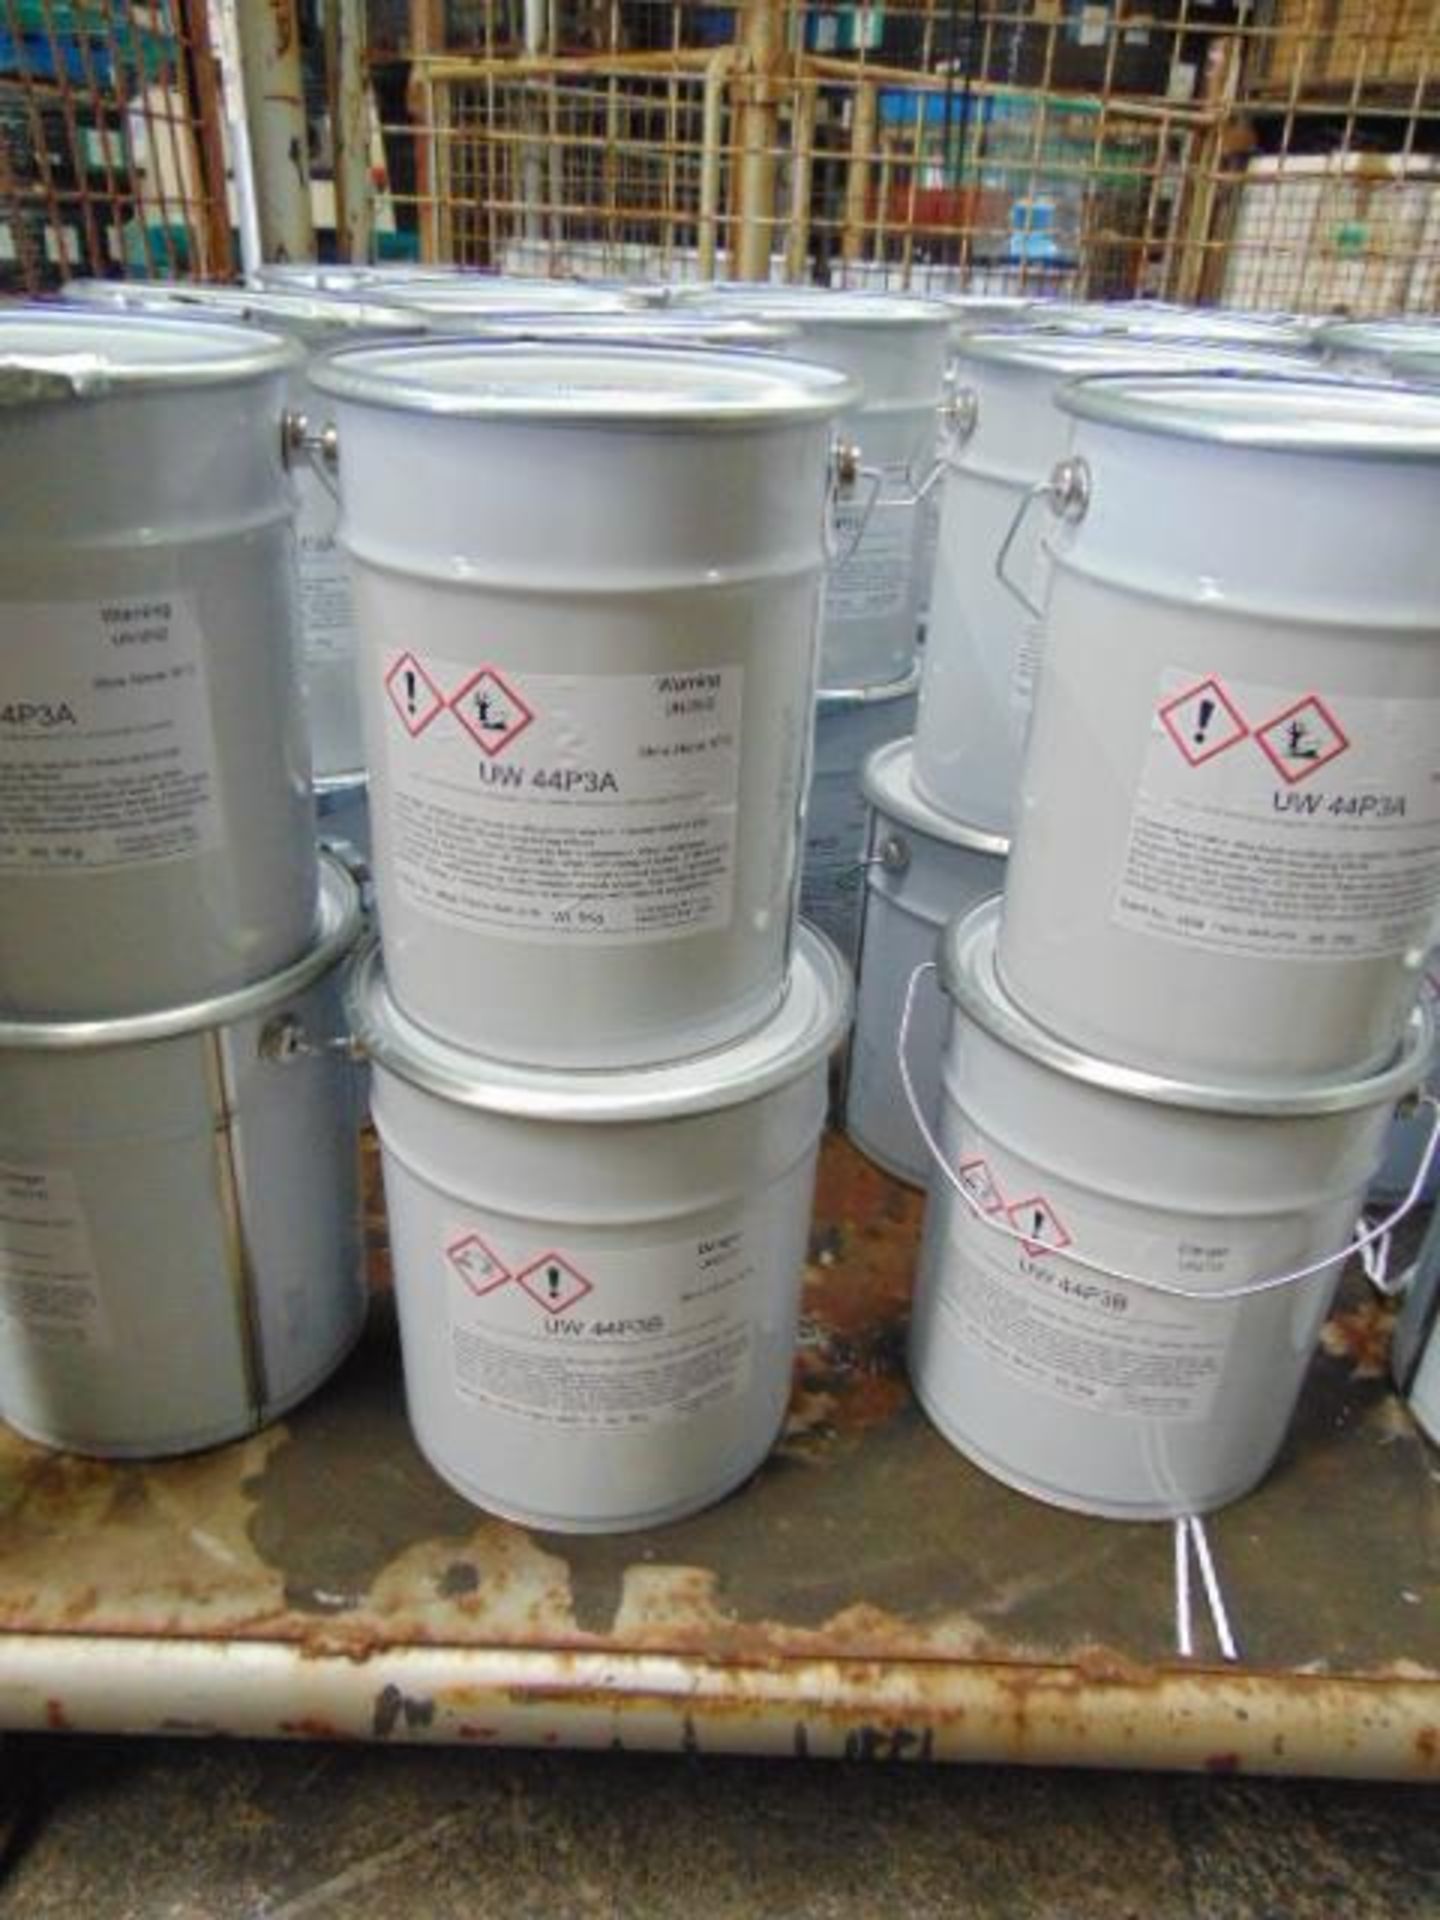 14 x Wessex Resins 2 Part Adhesive - Image 2 of 4